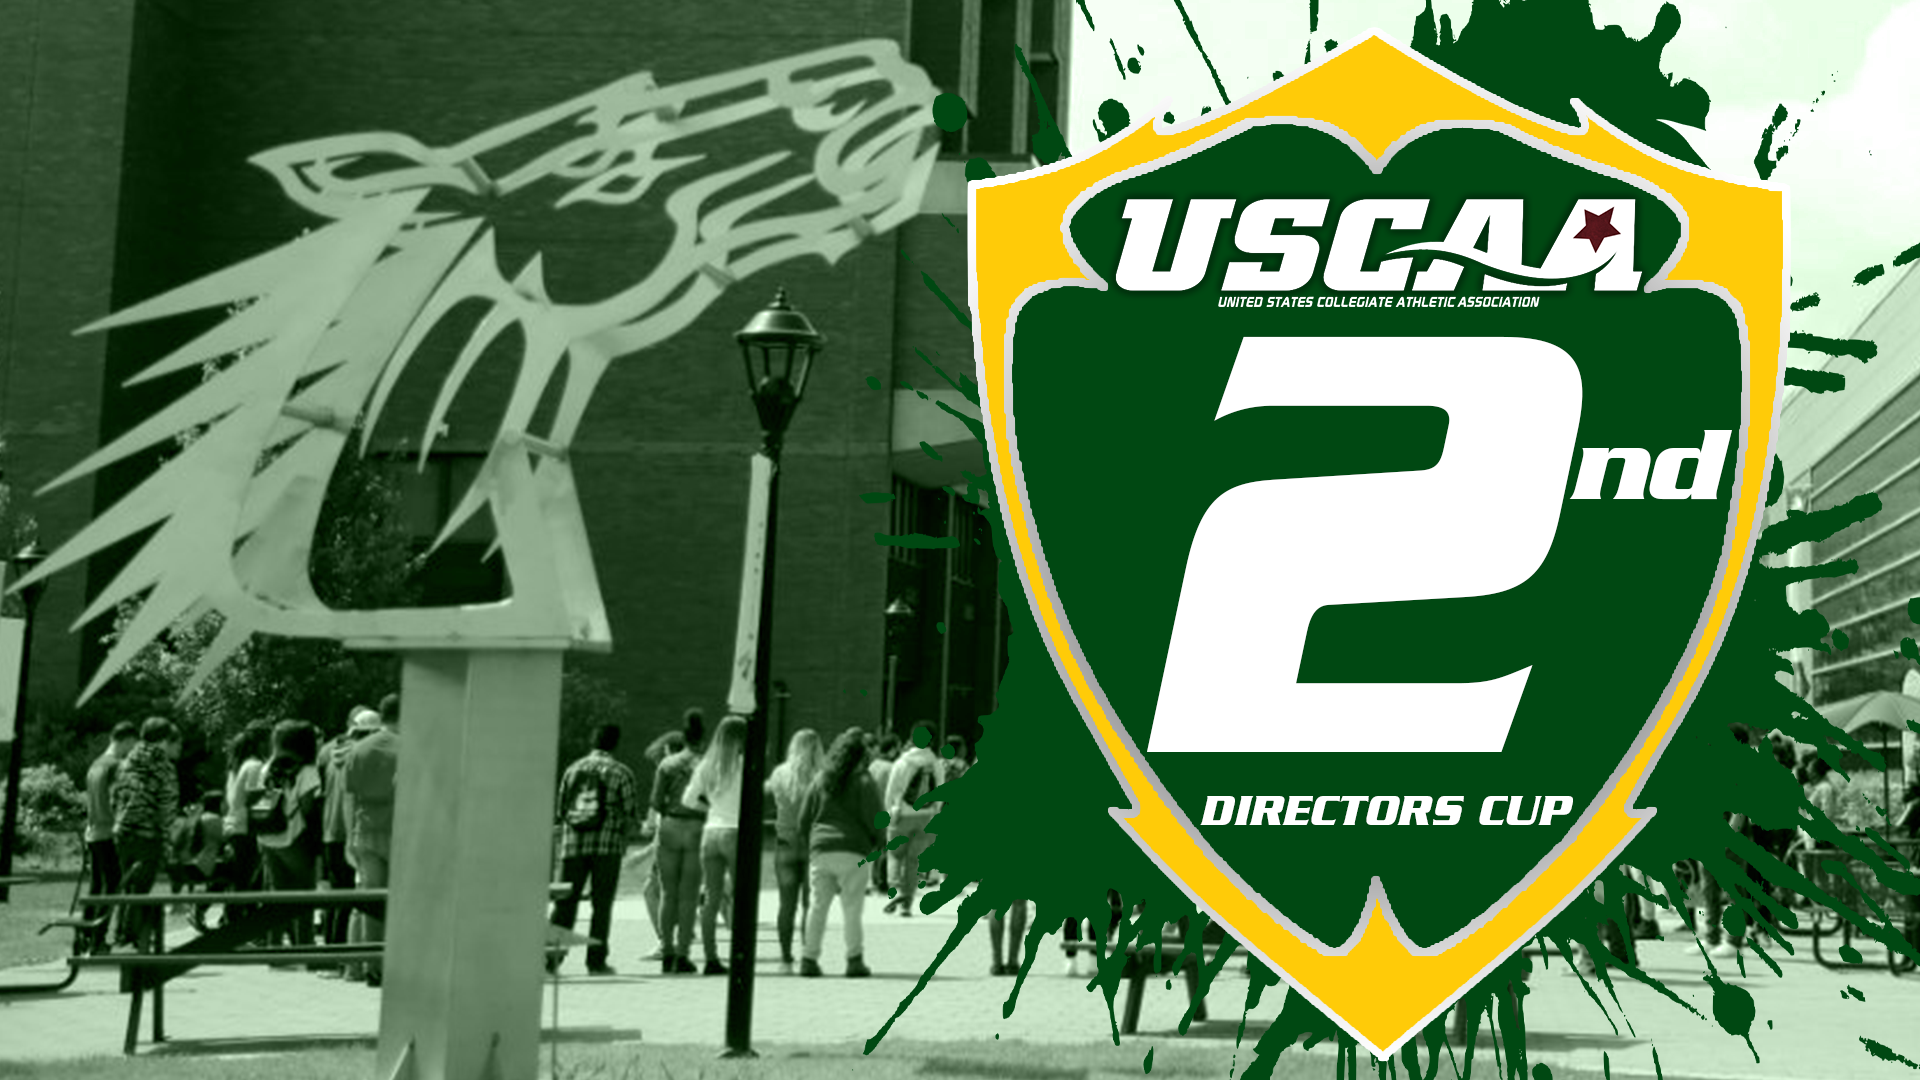 SUNY Delhi Second in USCAA Directors Cup After Successful Fall Season